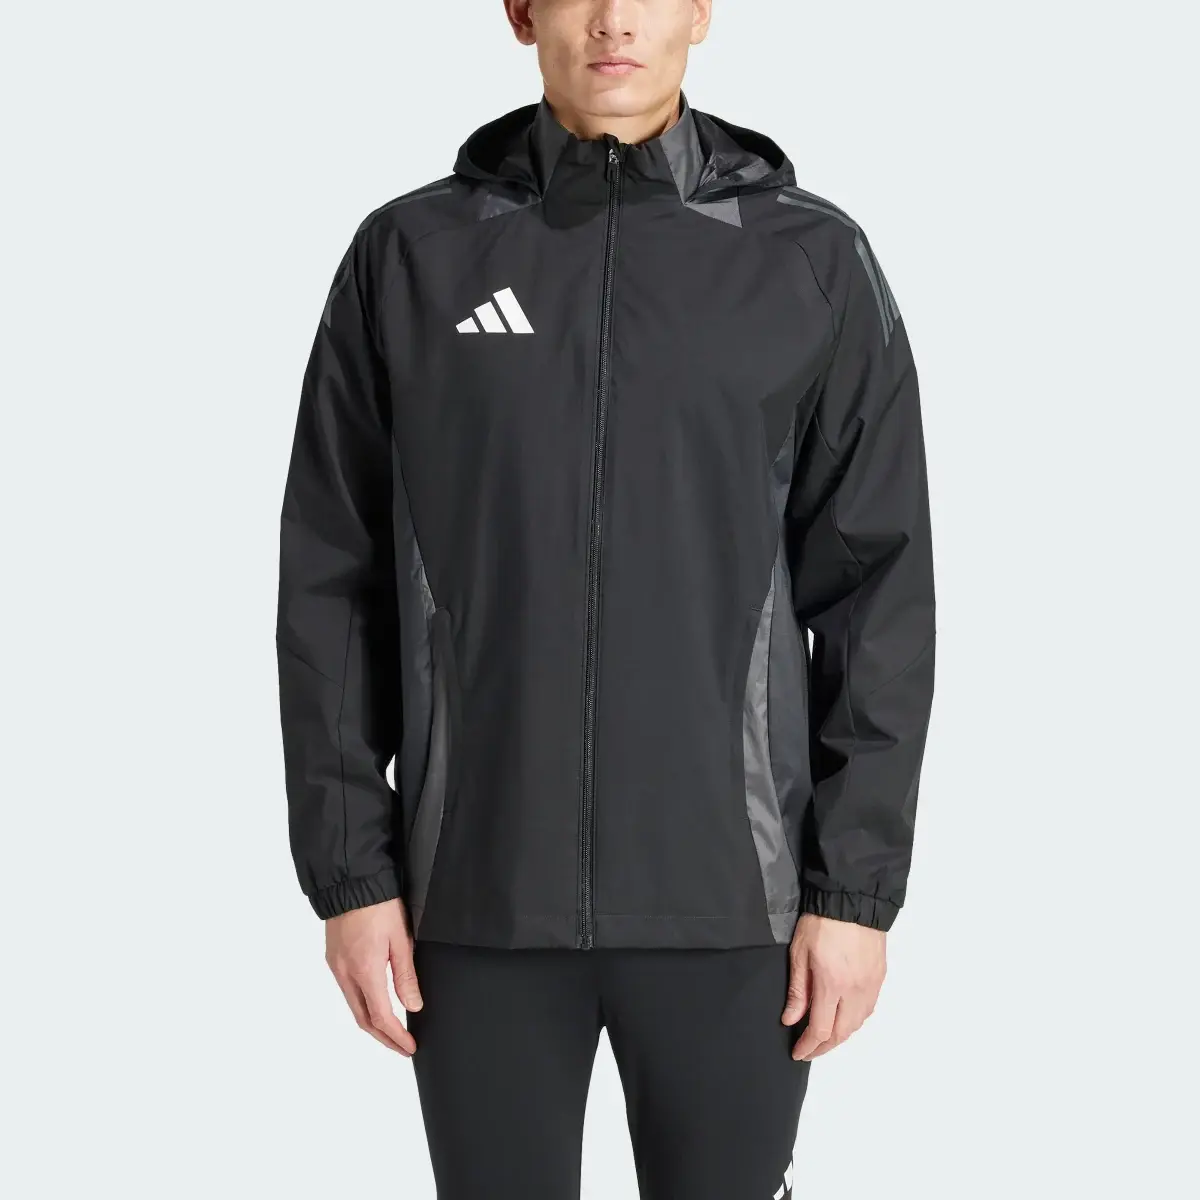 Adidas Tiro 24 Competition All-Weather Jacket. 1